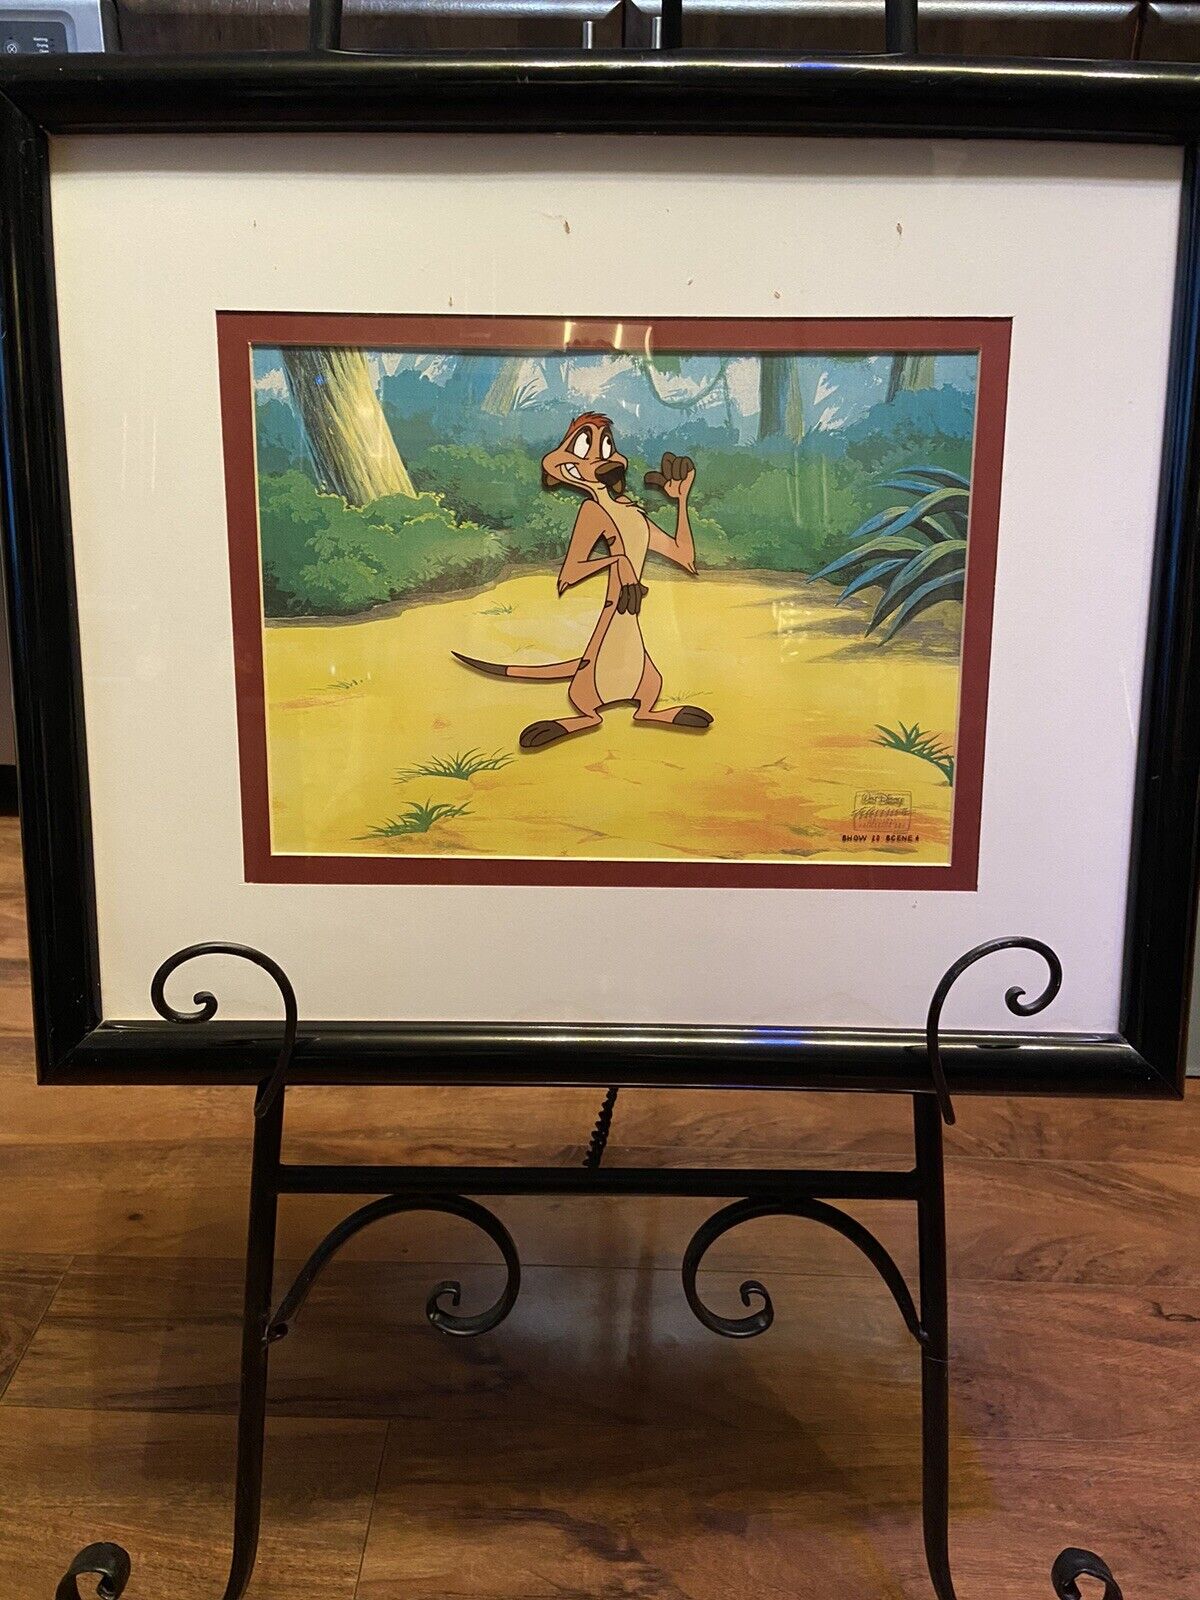 Disney TV Hand Painted Production Animation Cel The Lion King Timon & Pumbaa